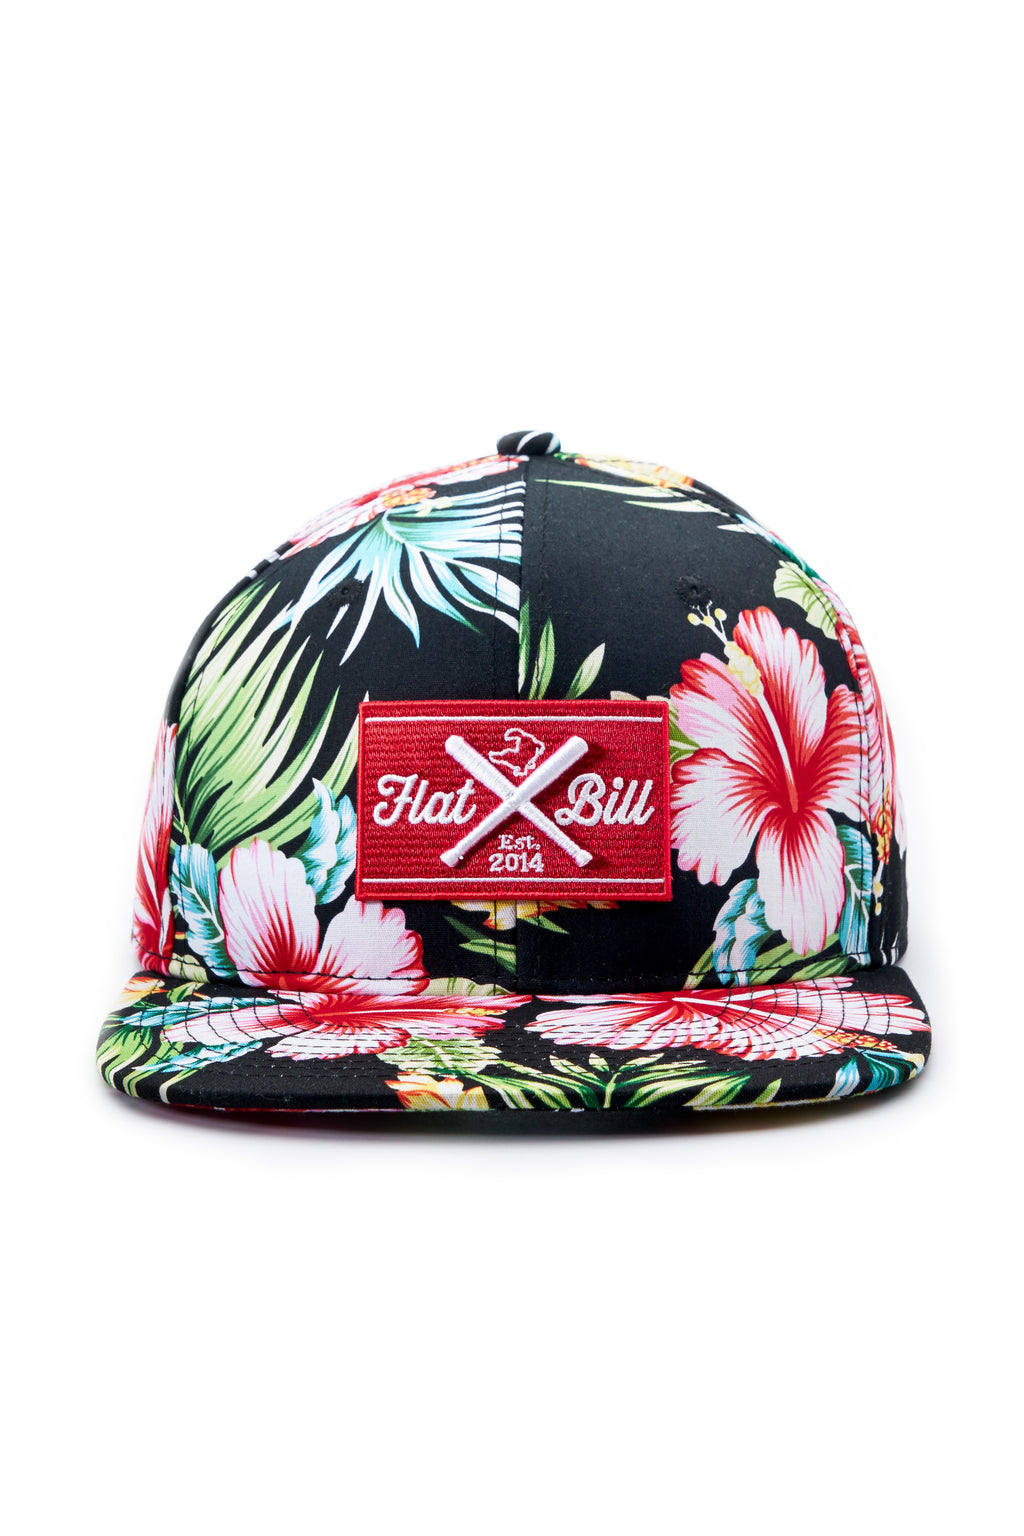 Flatbill Black and Red Floral Cap